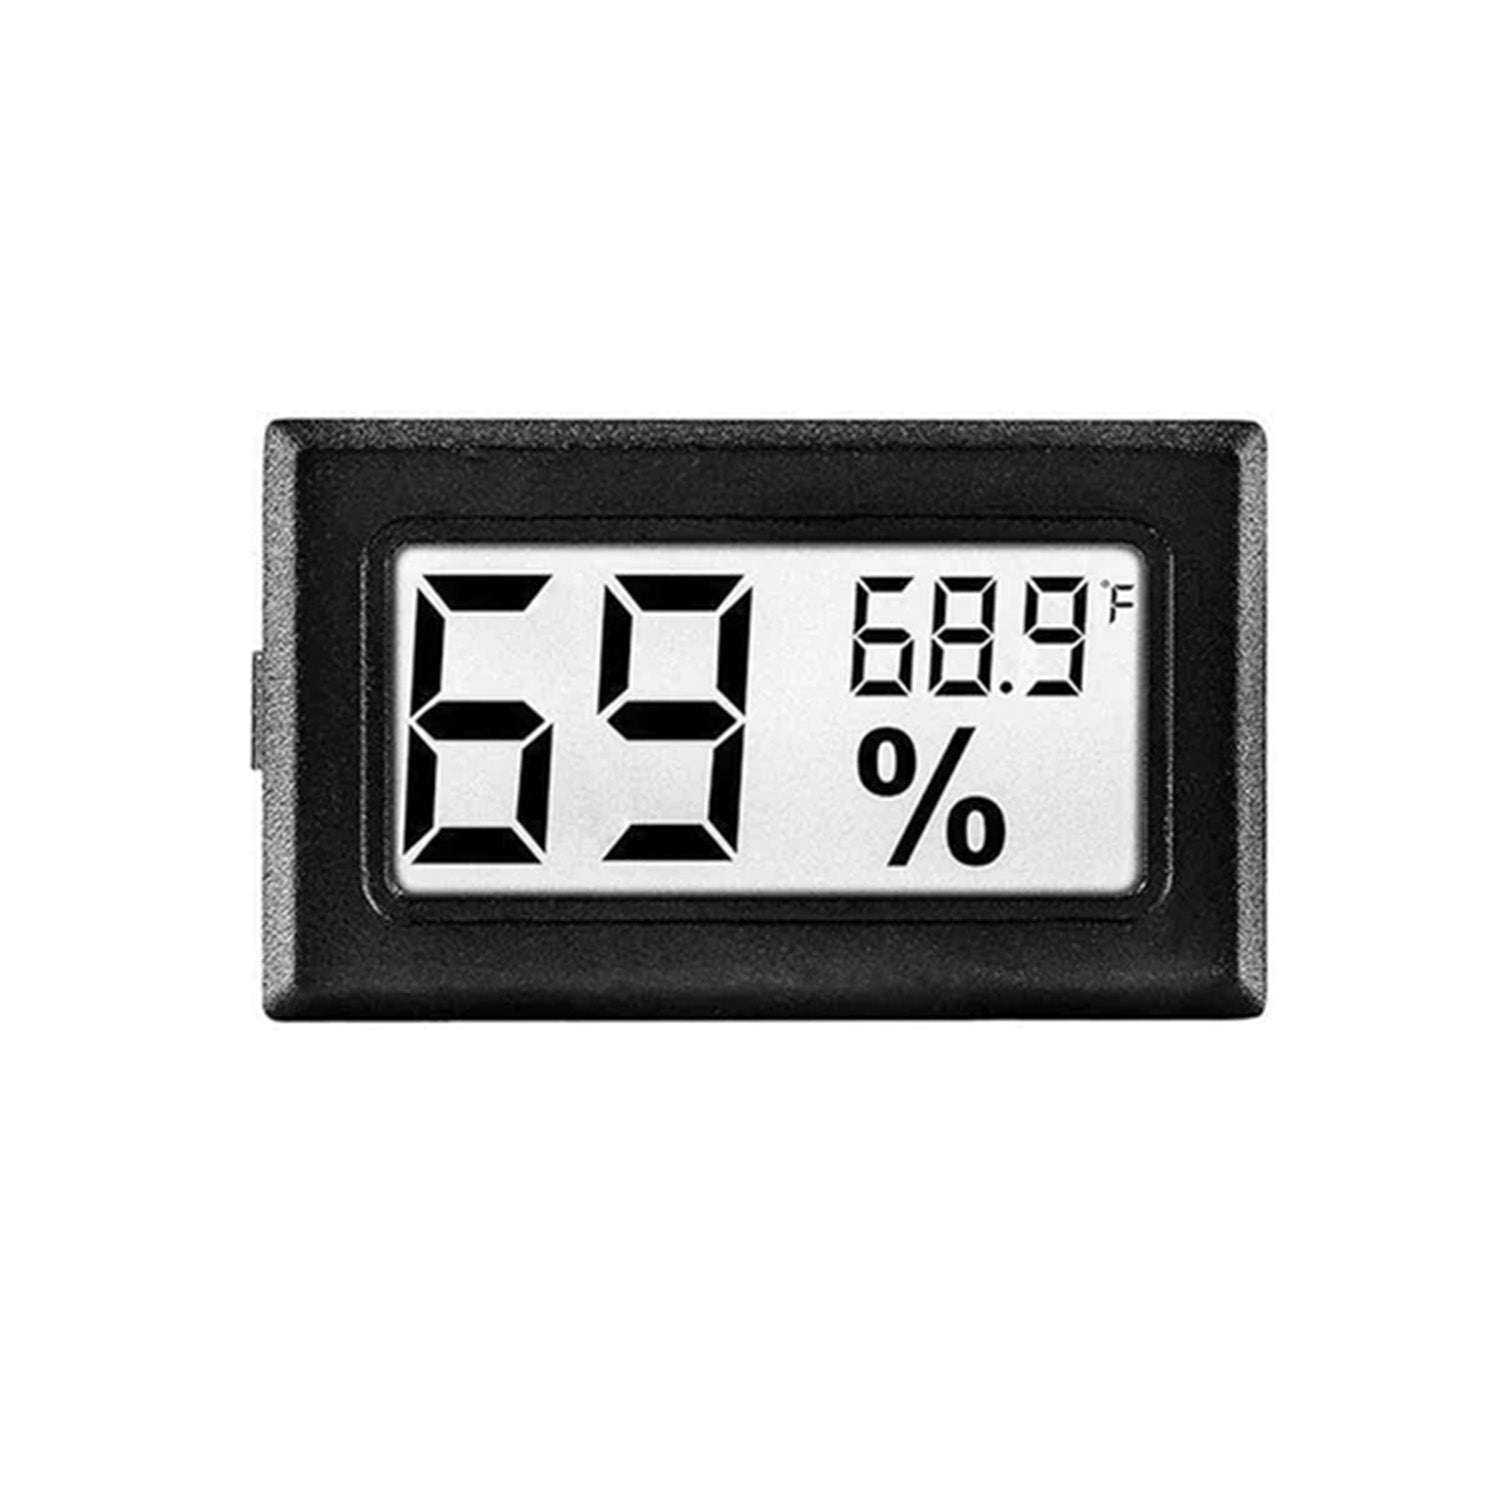 photo of a black hygrometer reading 69% at 68.9 degrees F, against a white background